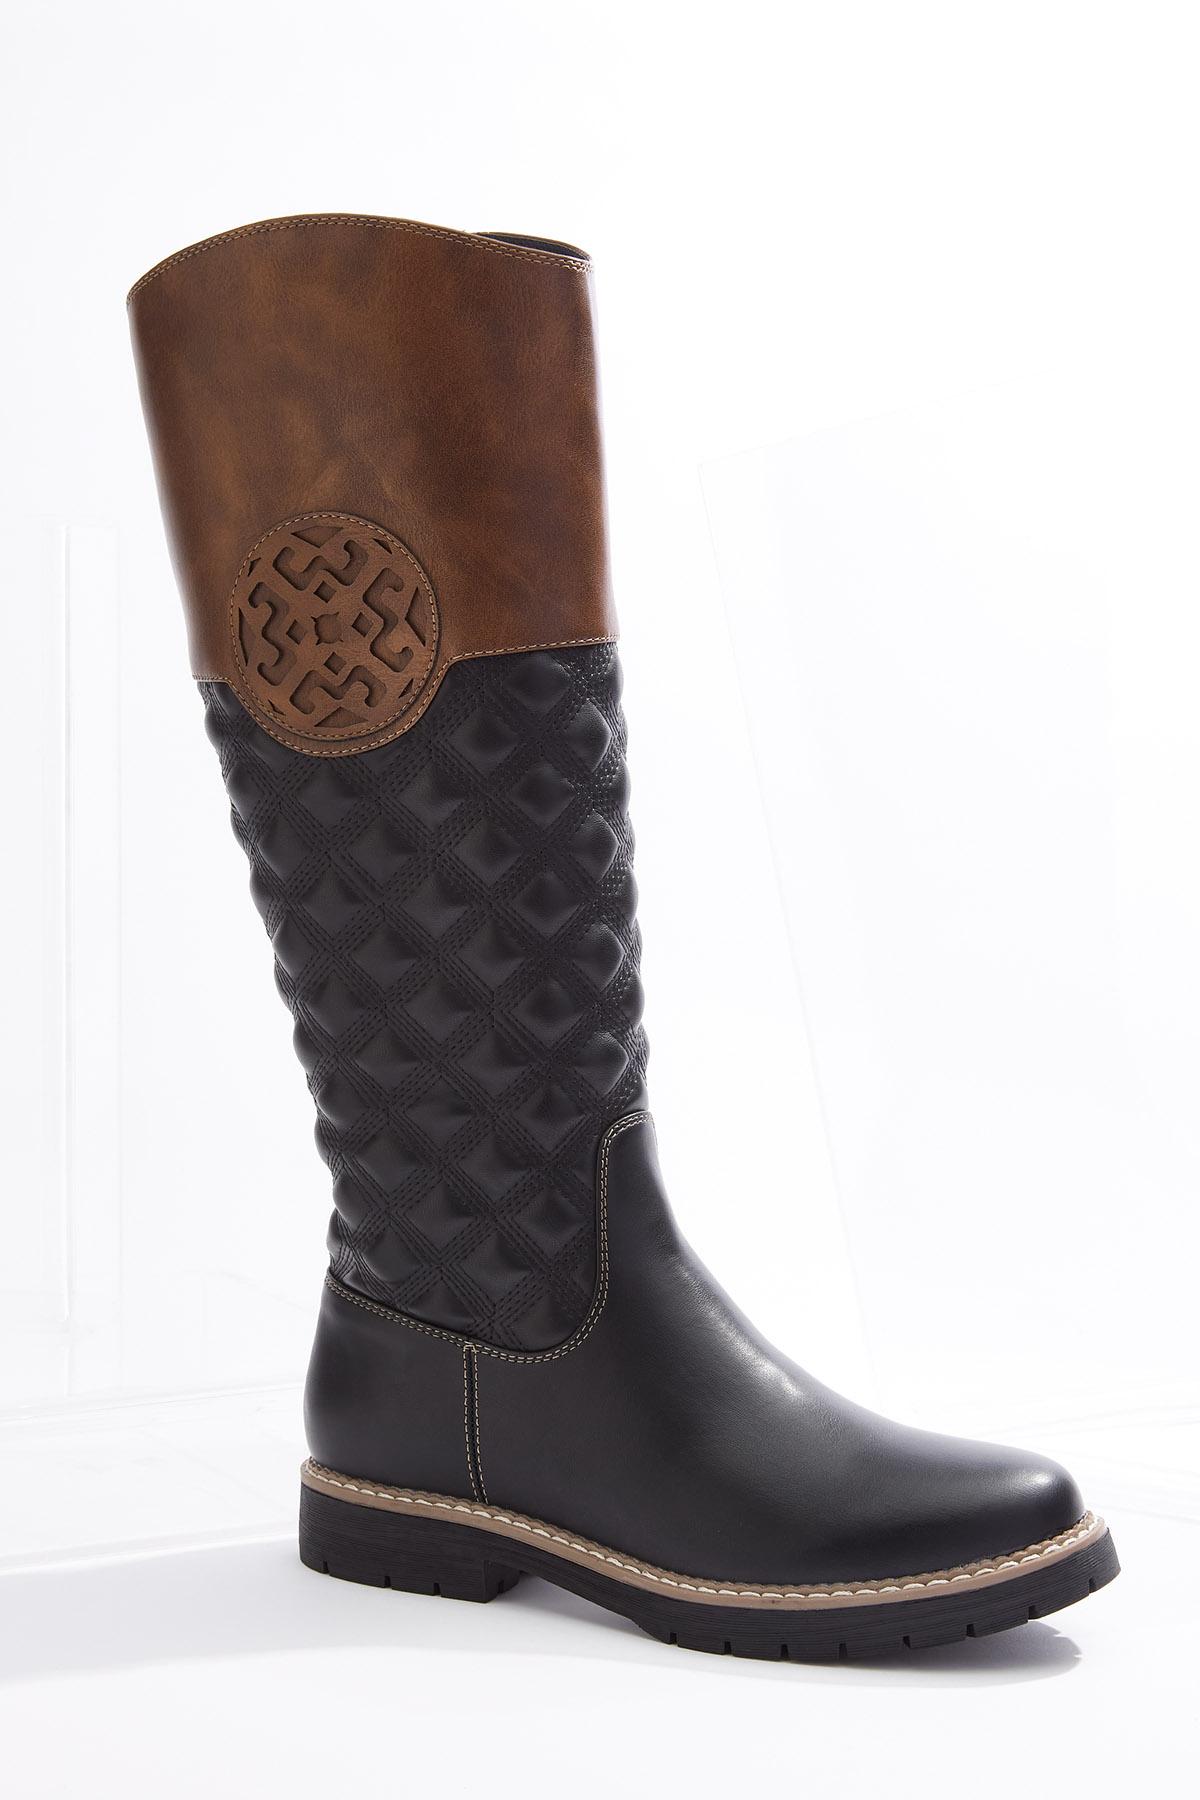 Two-Tone Riding Boots